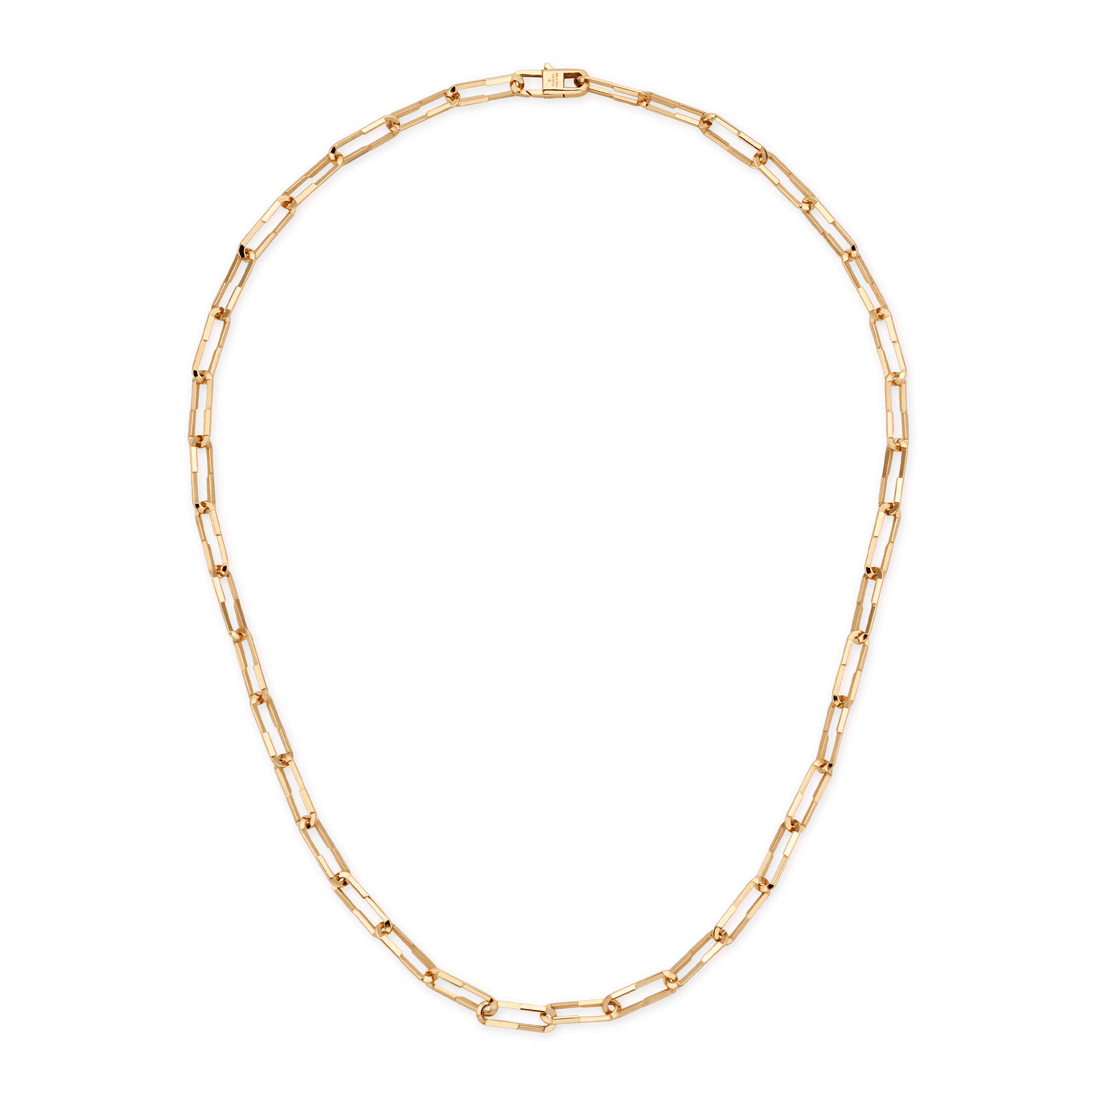 Gucci "Link to Love" 18kt Rose Gold Women's Link Necklace